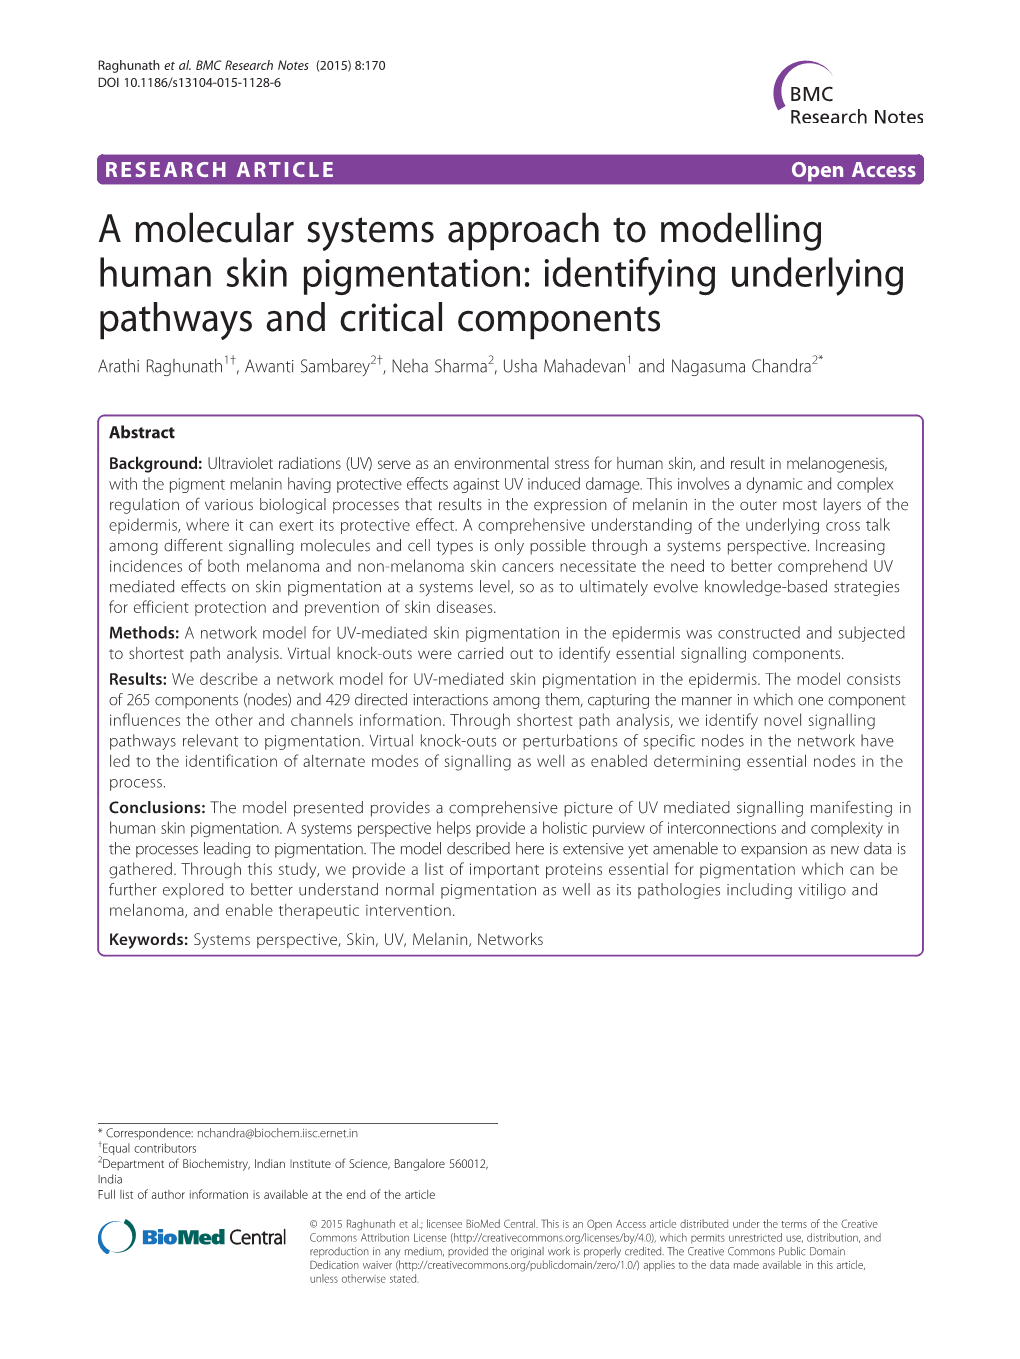 A Molecular Systems Approach to Modelling